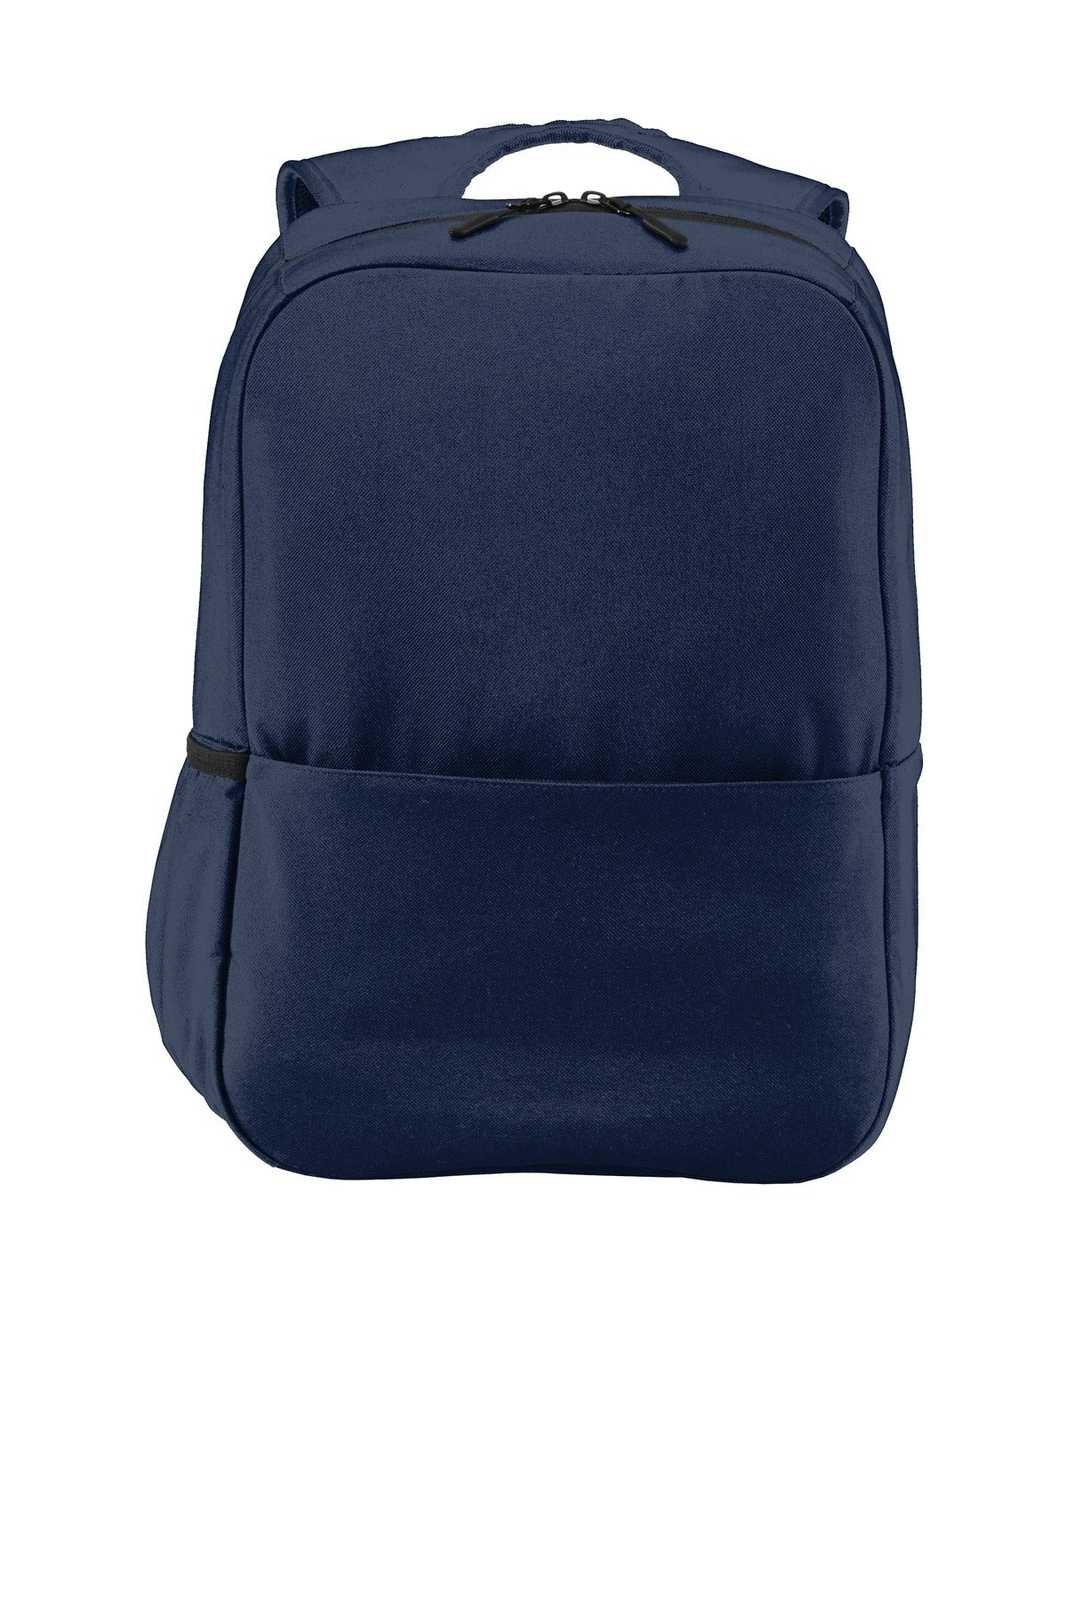 Port Authority BG218 Access Square Backpack - River Blue Navy - HIT a Double - 1